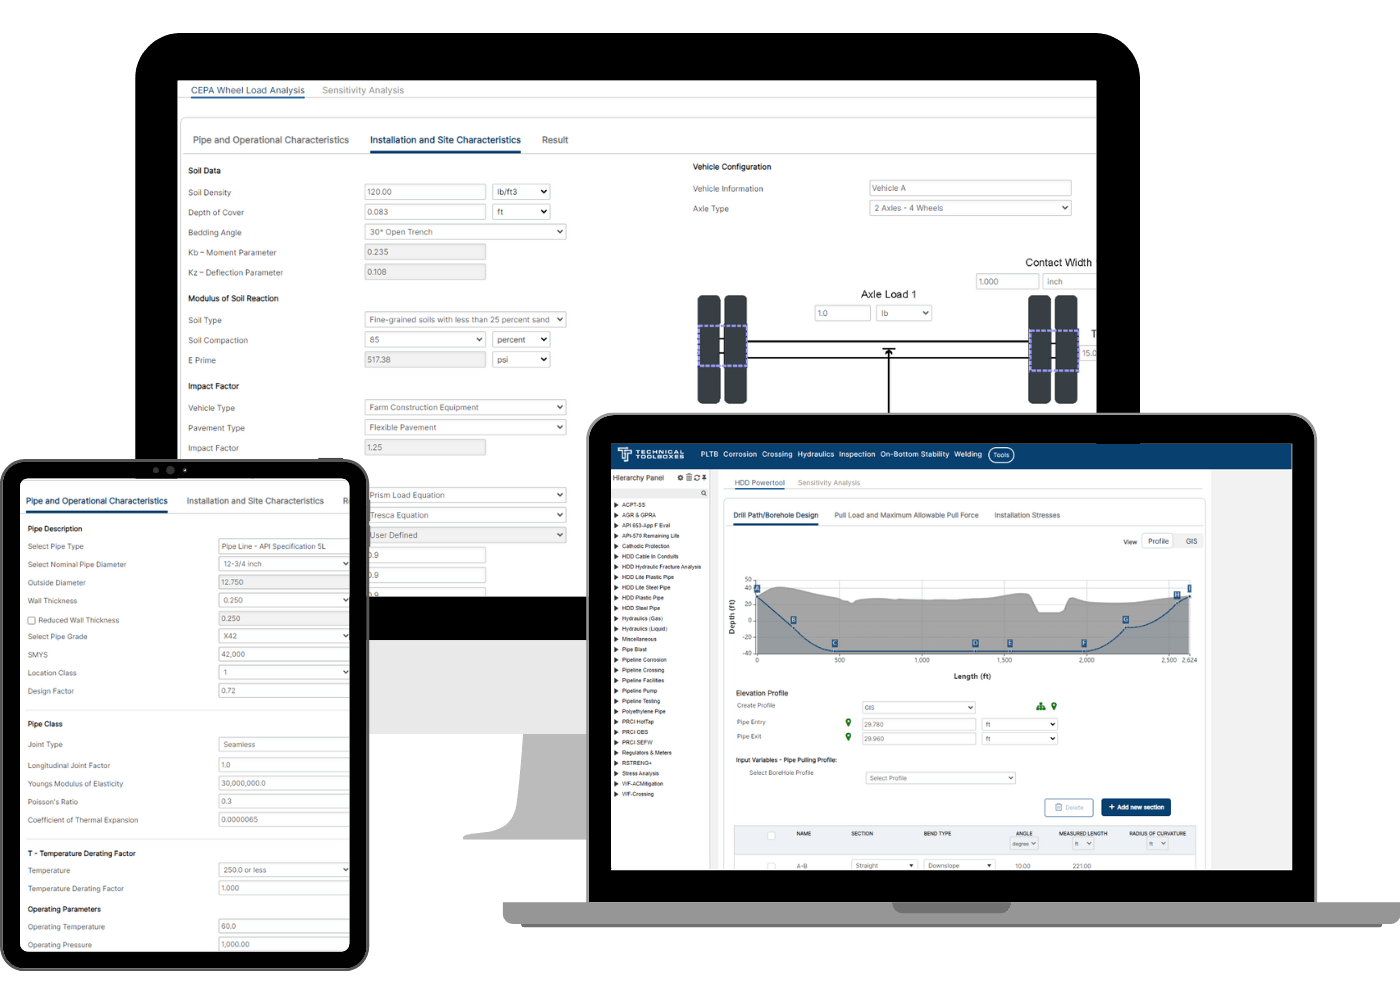 Manage pipeline crossings seamlessly with our integrated tools. From design to record-keeping, streamline workflows, and reduce manual data input.